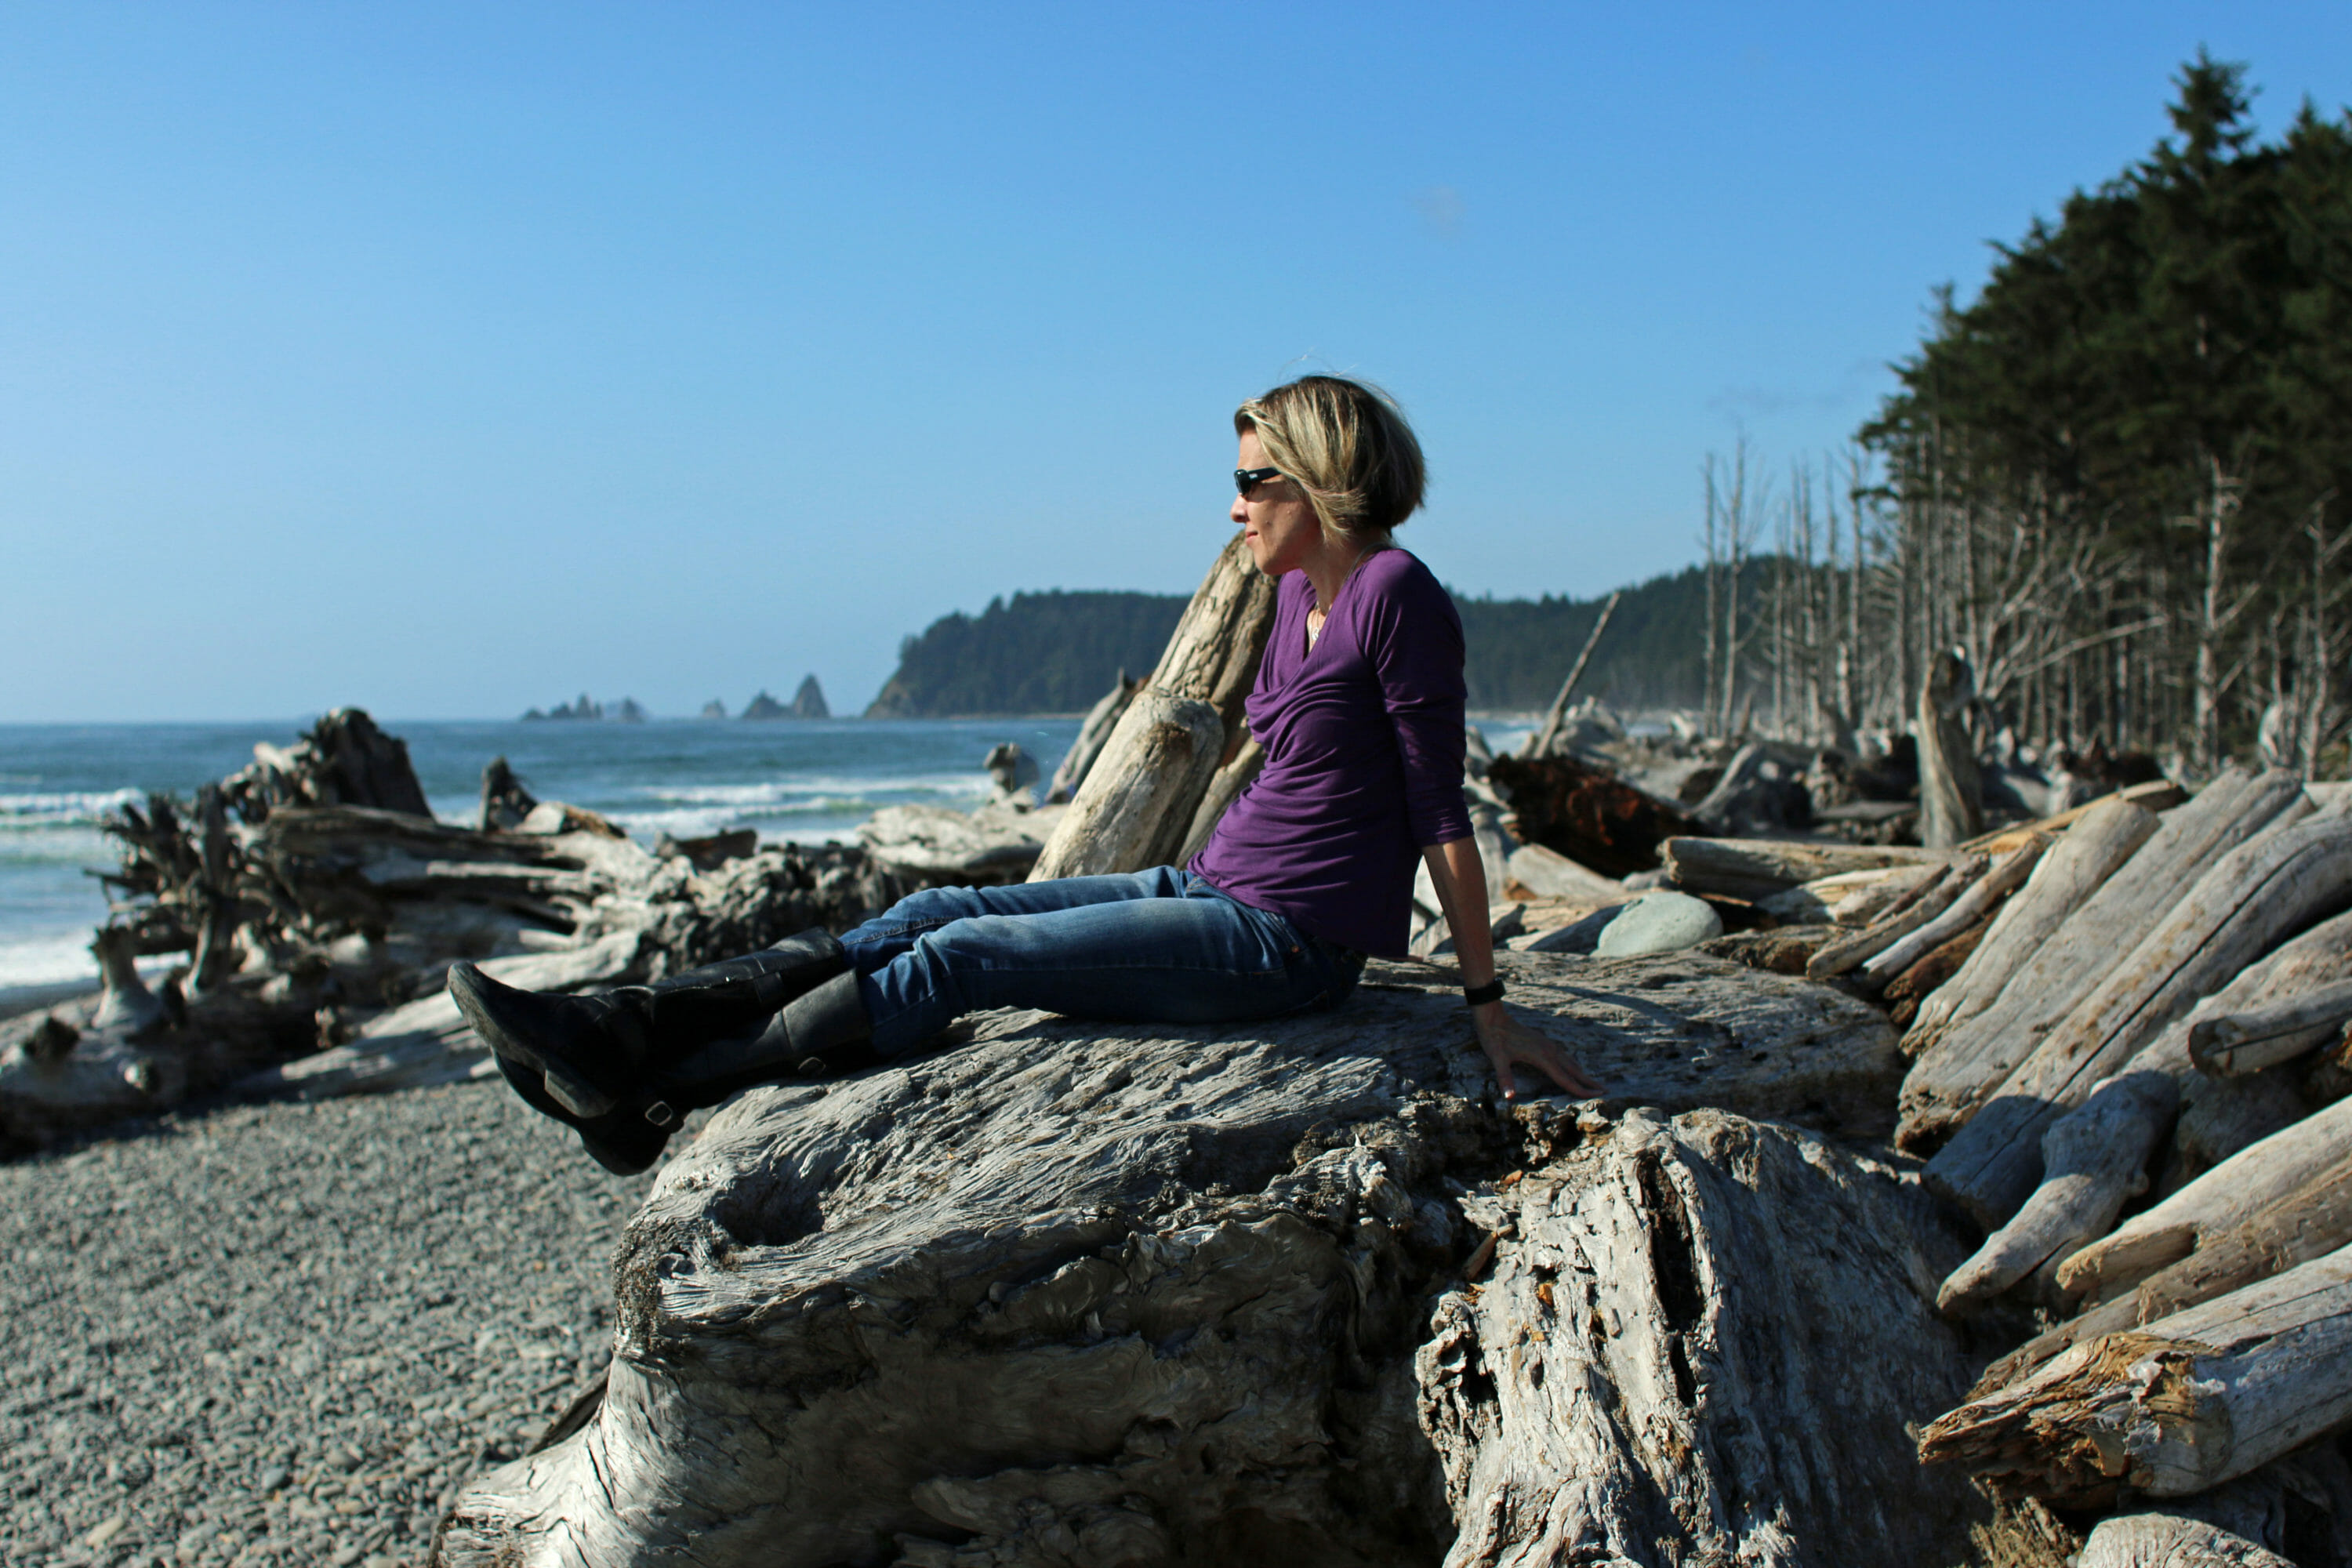 woman sitting on ocean jetty wearing purple top and jeans